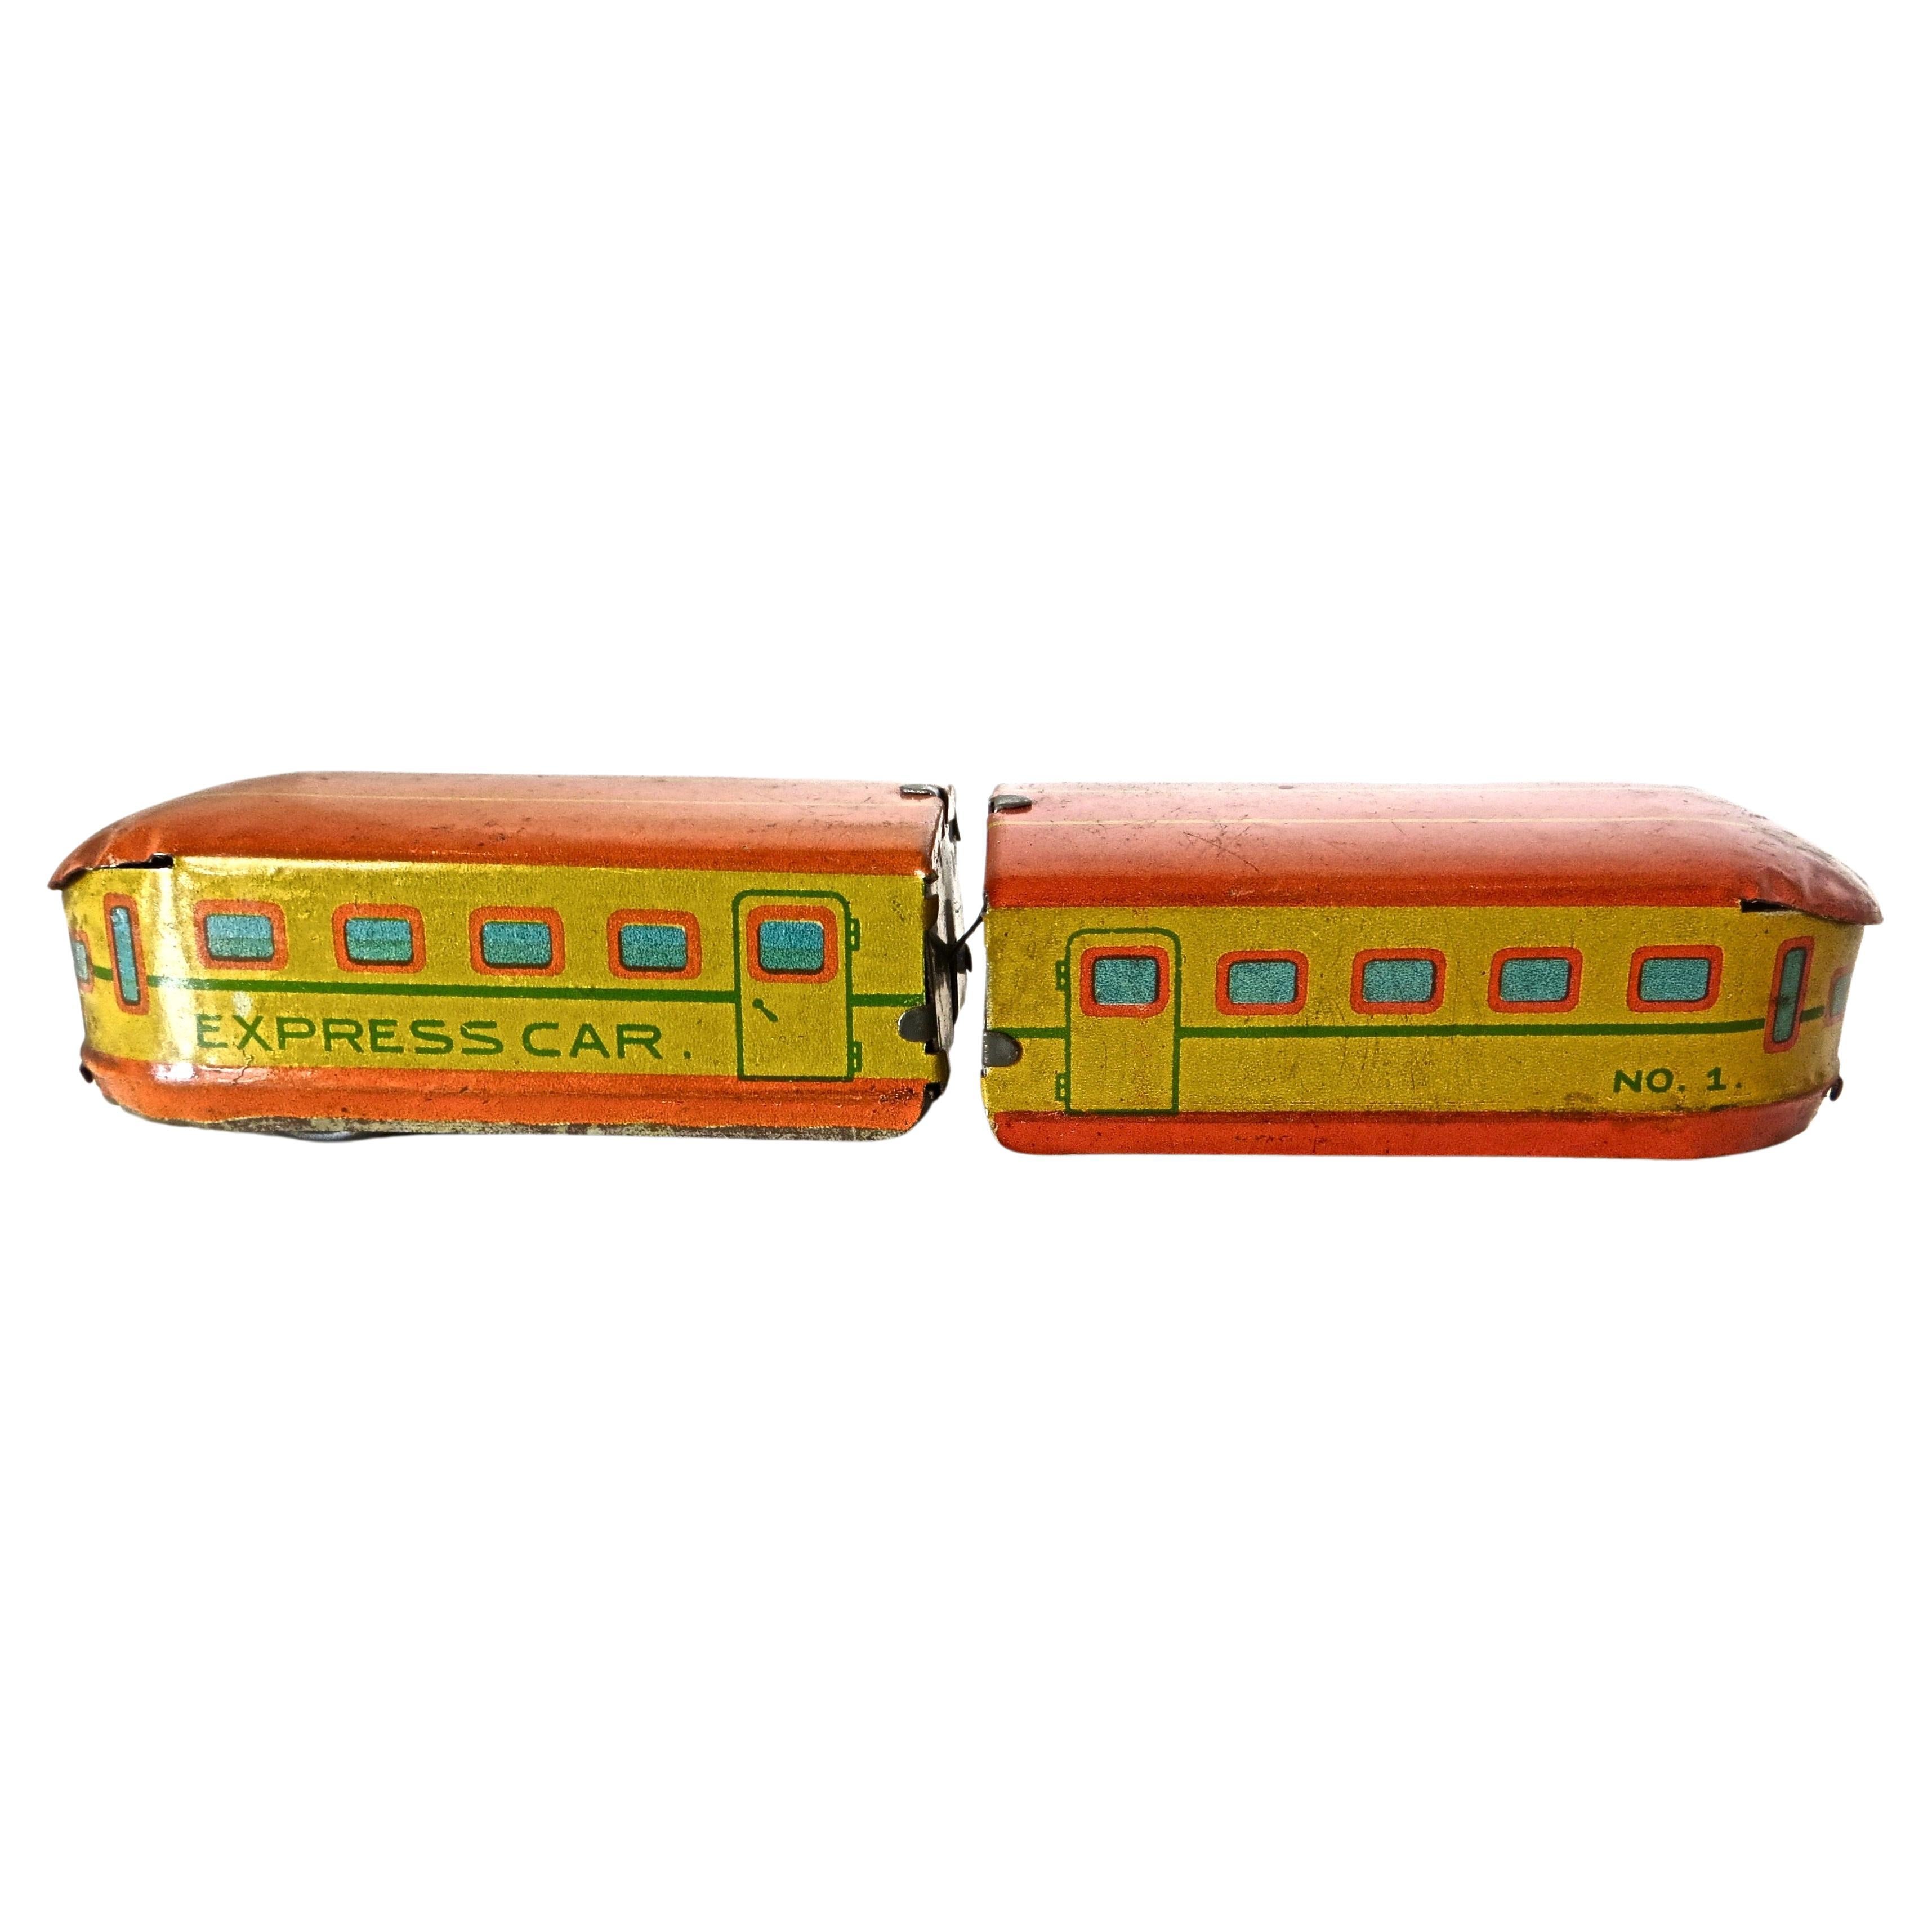 Late 1940s Penny Toy Wind-Up Train, Attributed Japan